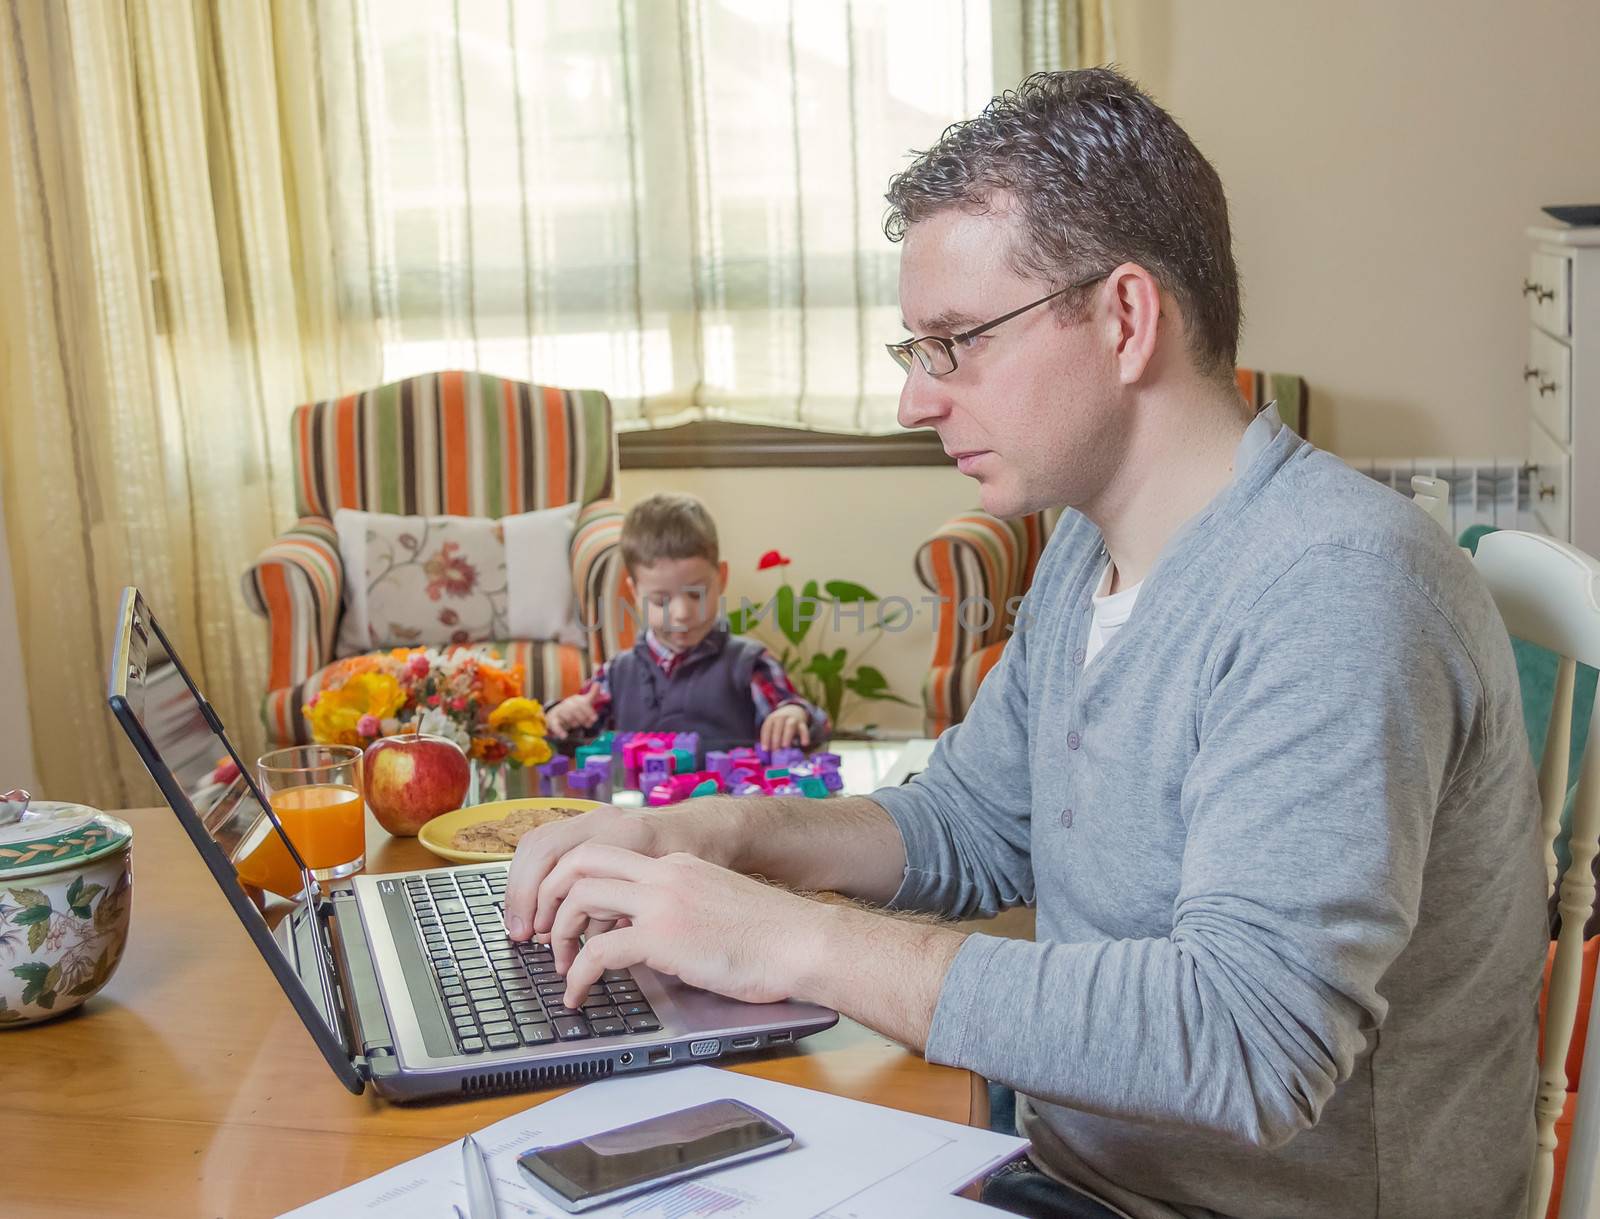 Father working hard in home office with notebook and his boring son playing on the background